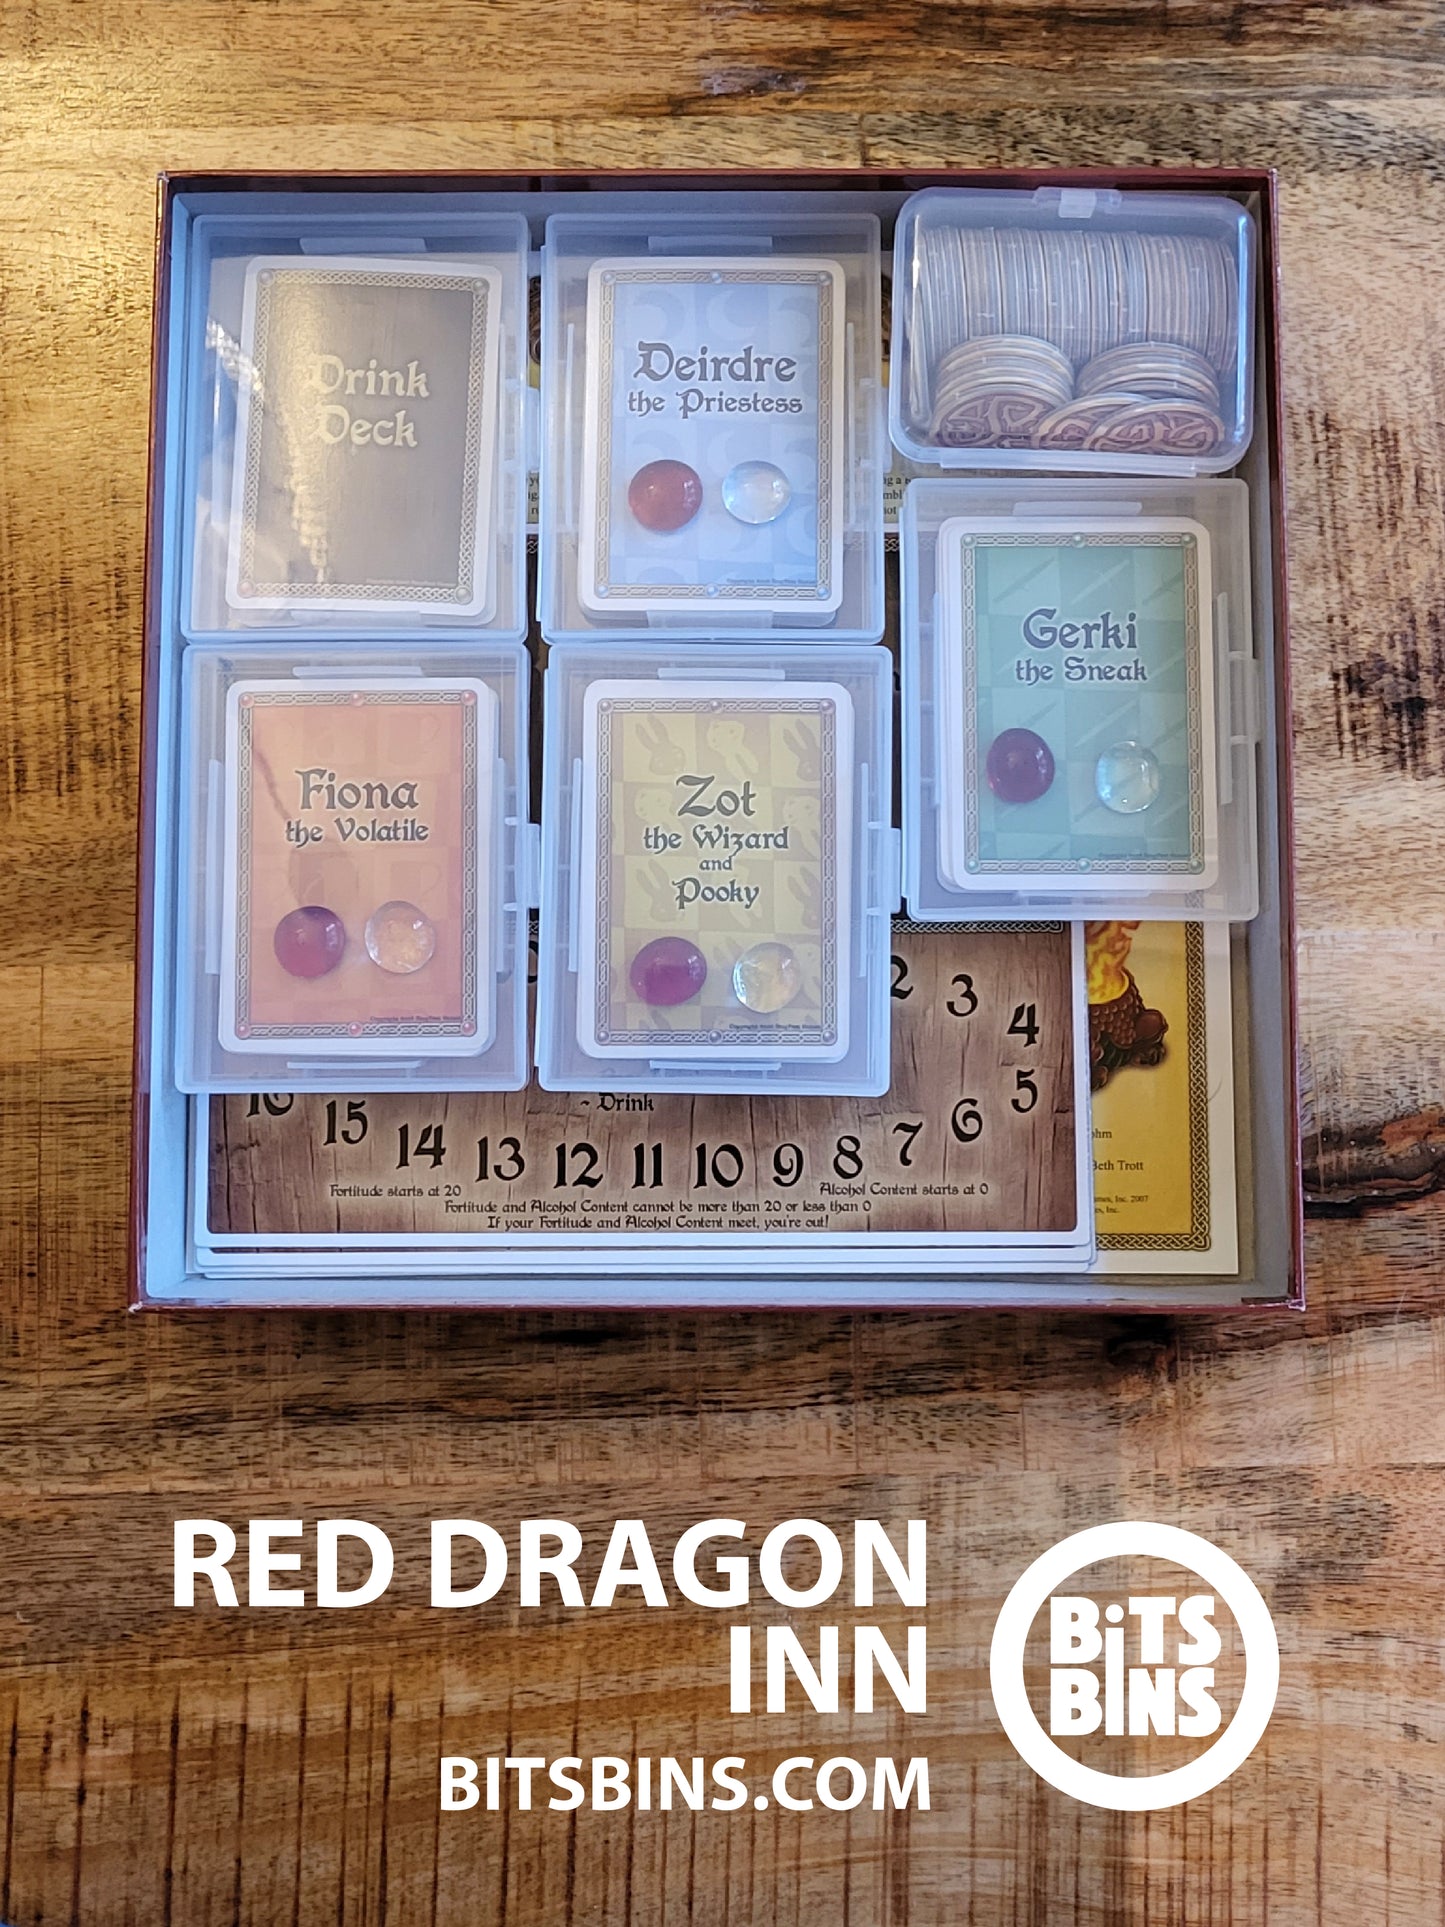 RECOMMENDED Bitsbins Red Dragon Inn, The - 5 Card Boxes, 1 Case